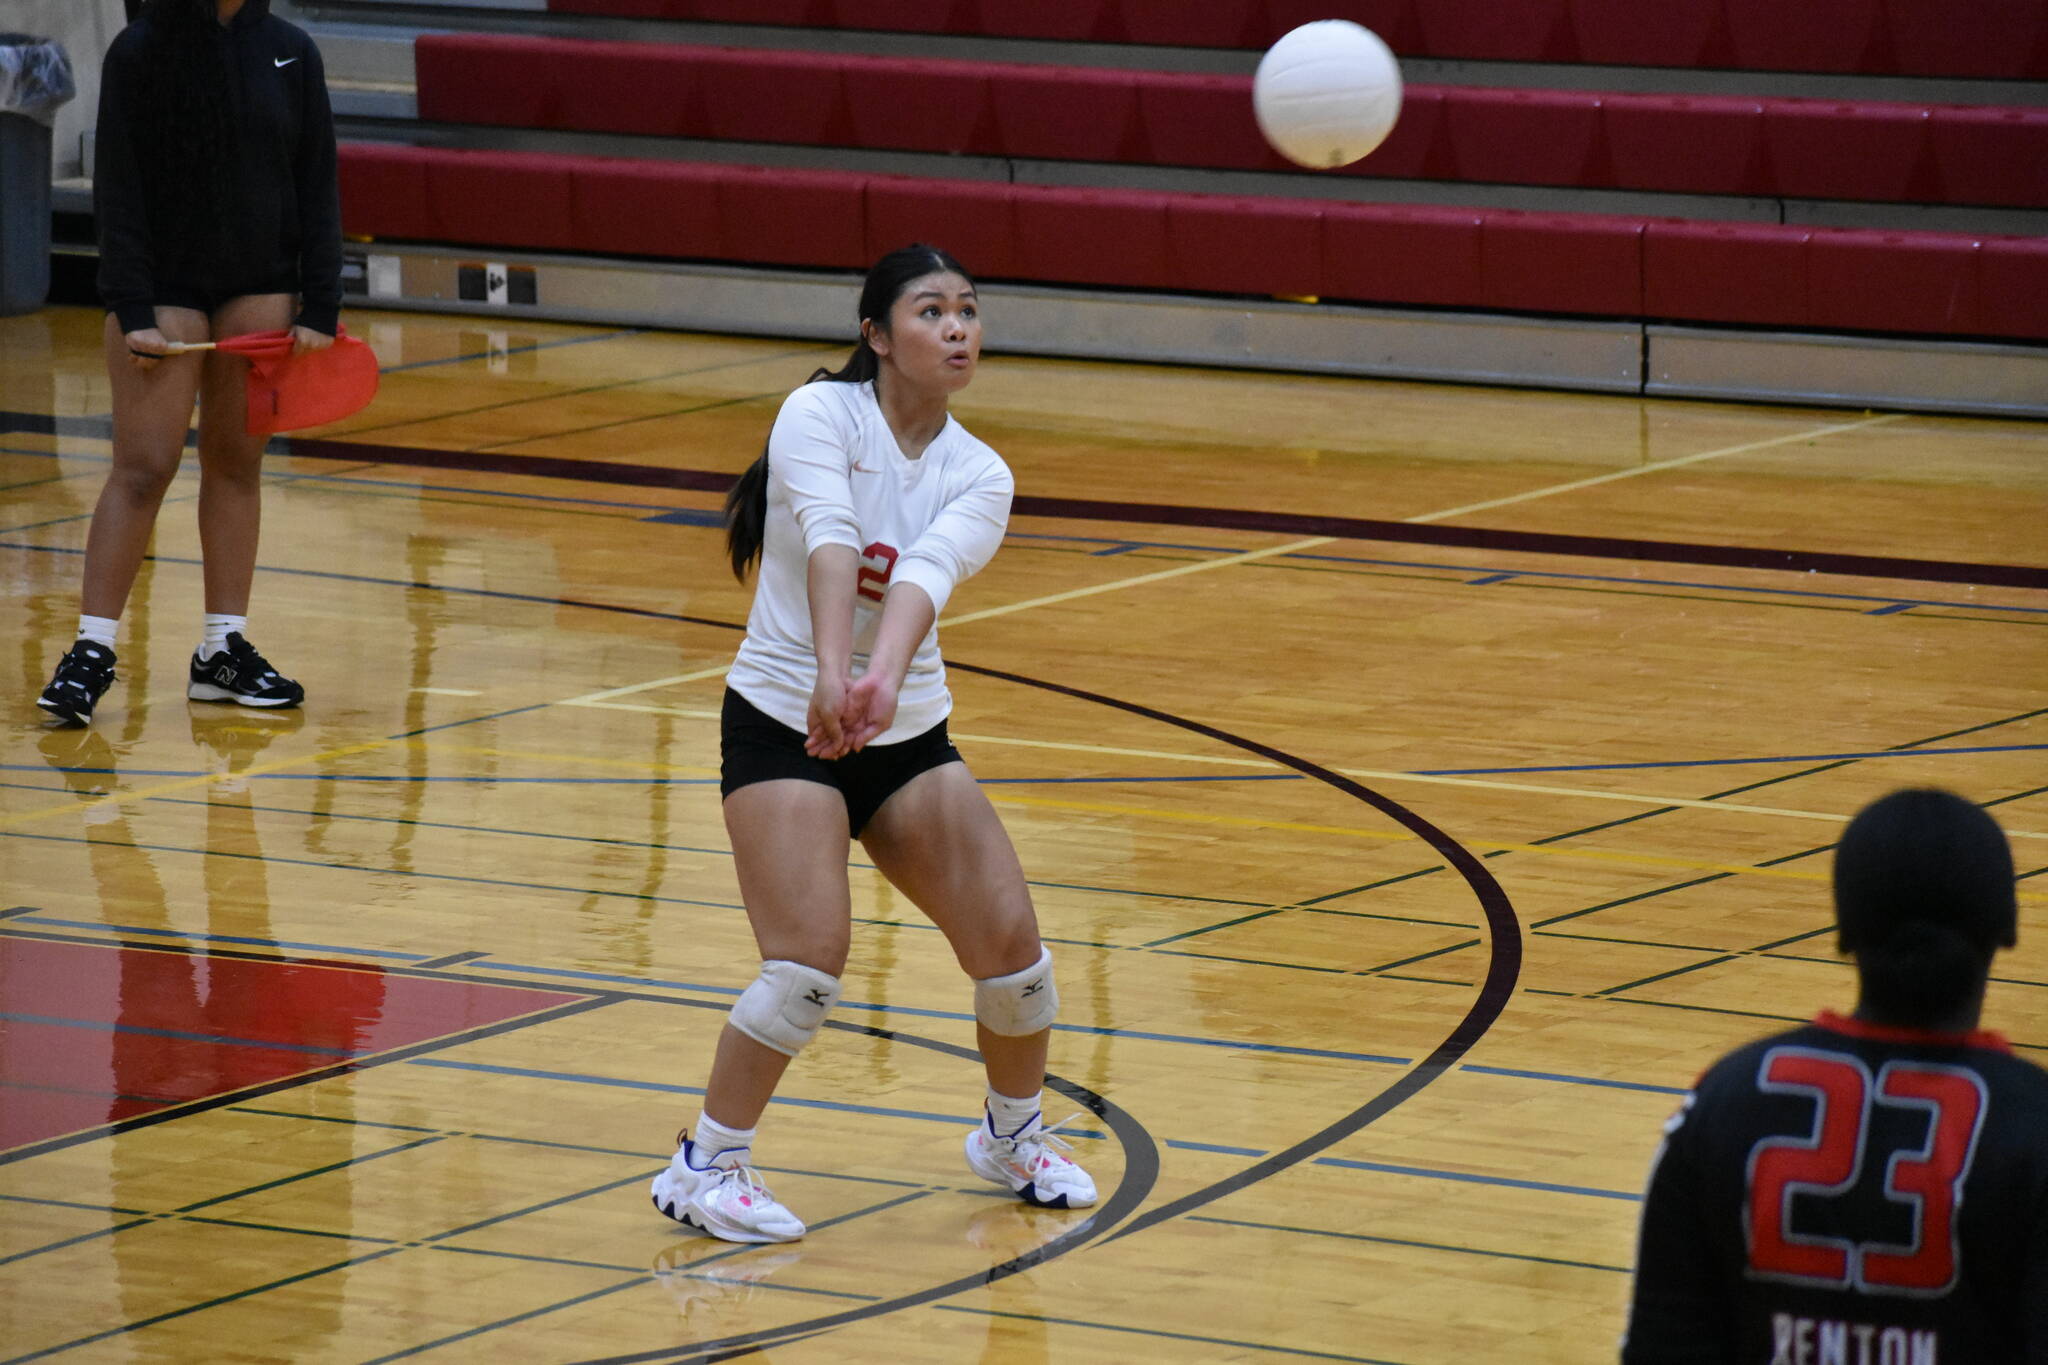 Sherley Martinez with a pass to a teammate in the second set against Tyee. Ben Ray / The Reporter